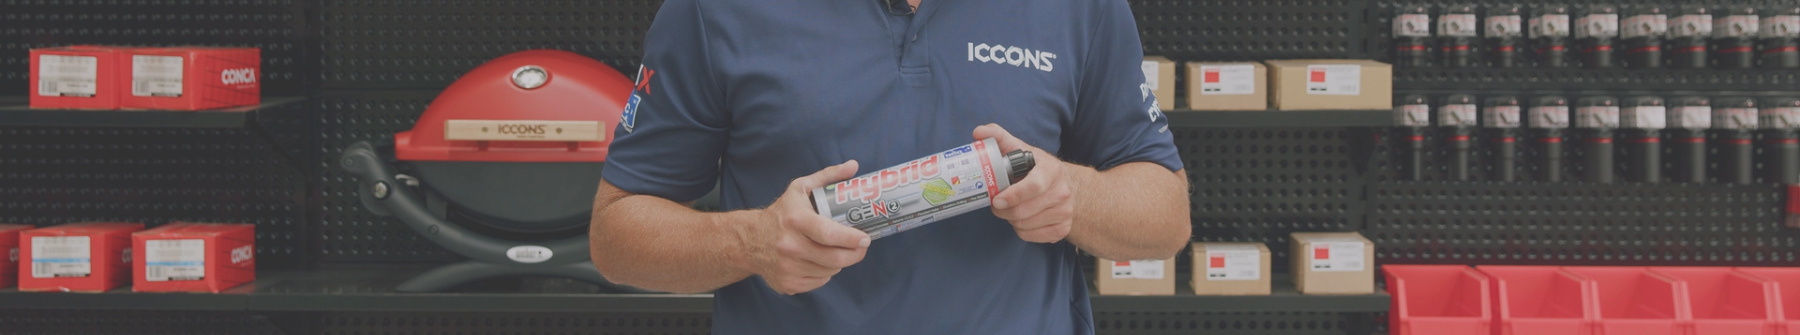 The Goods: ICCONS BIS-HY Hybrid Gen 2 Injection Adhesive